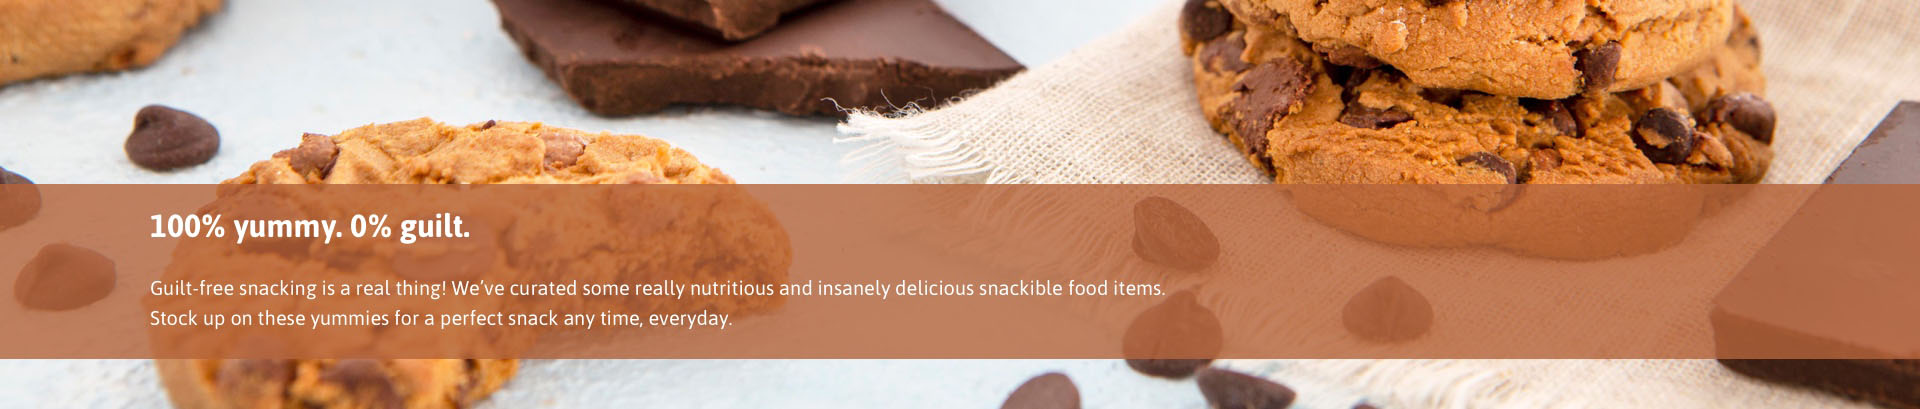 Food for thought - Snackibles Banner